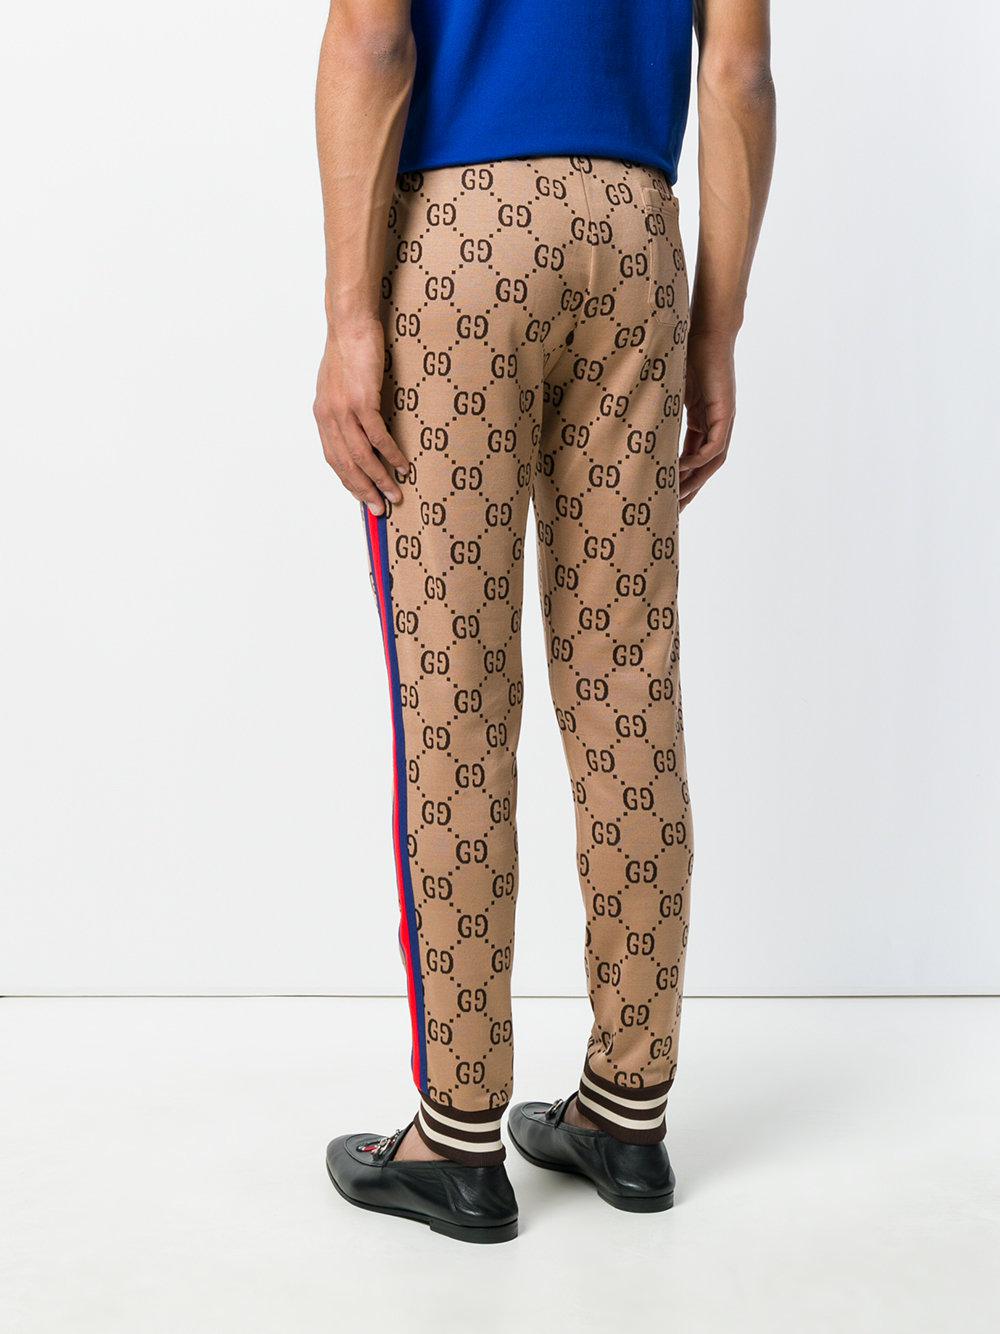 Gucci Cotton Gg Jacquard Jogging Trousers in Natural for Men - Lyst